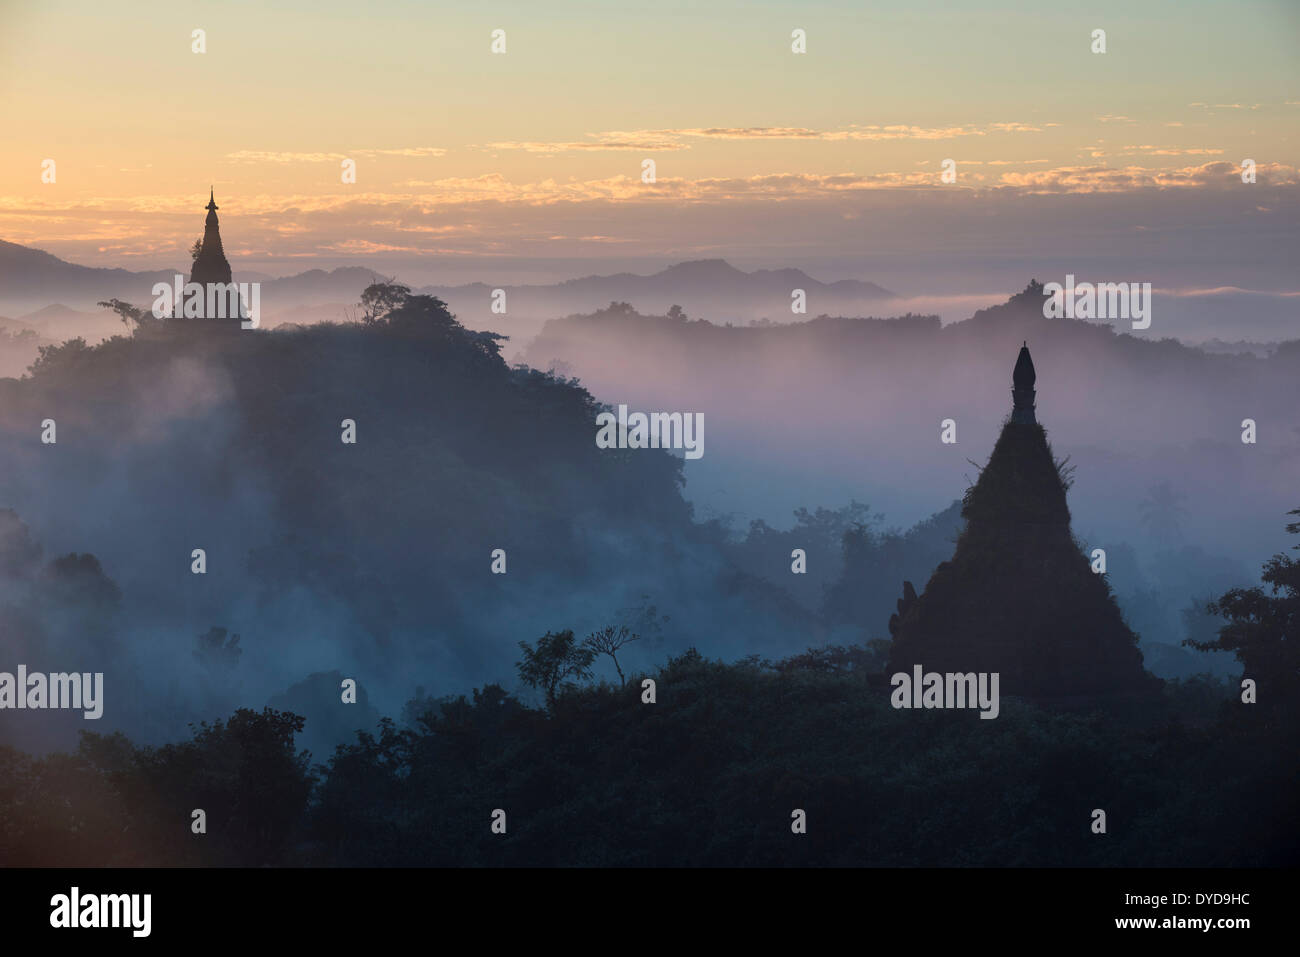 Pagodas surrounded by trees, in the mist, Mrauk U, Sittwe District, Rakhine State, Myanmar Stock Photo